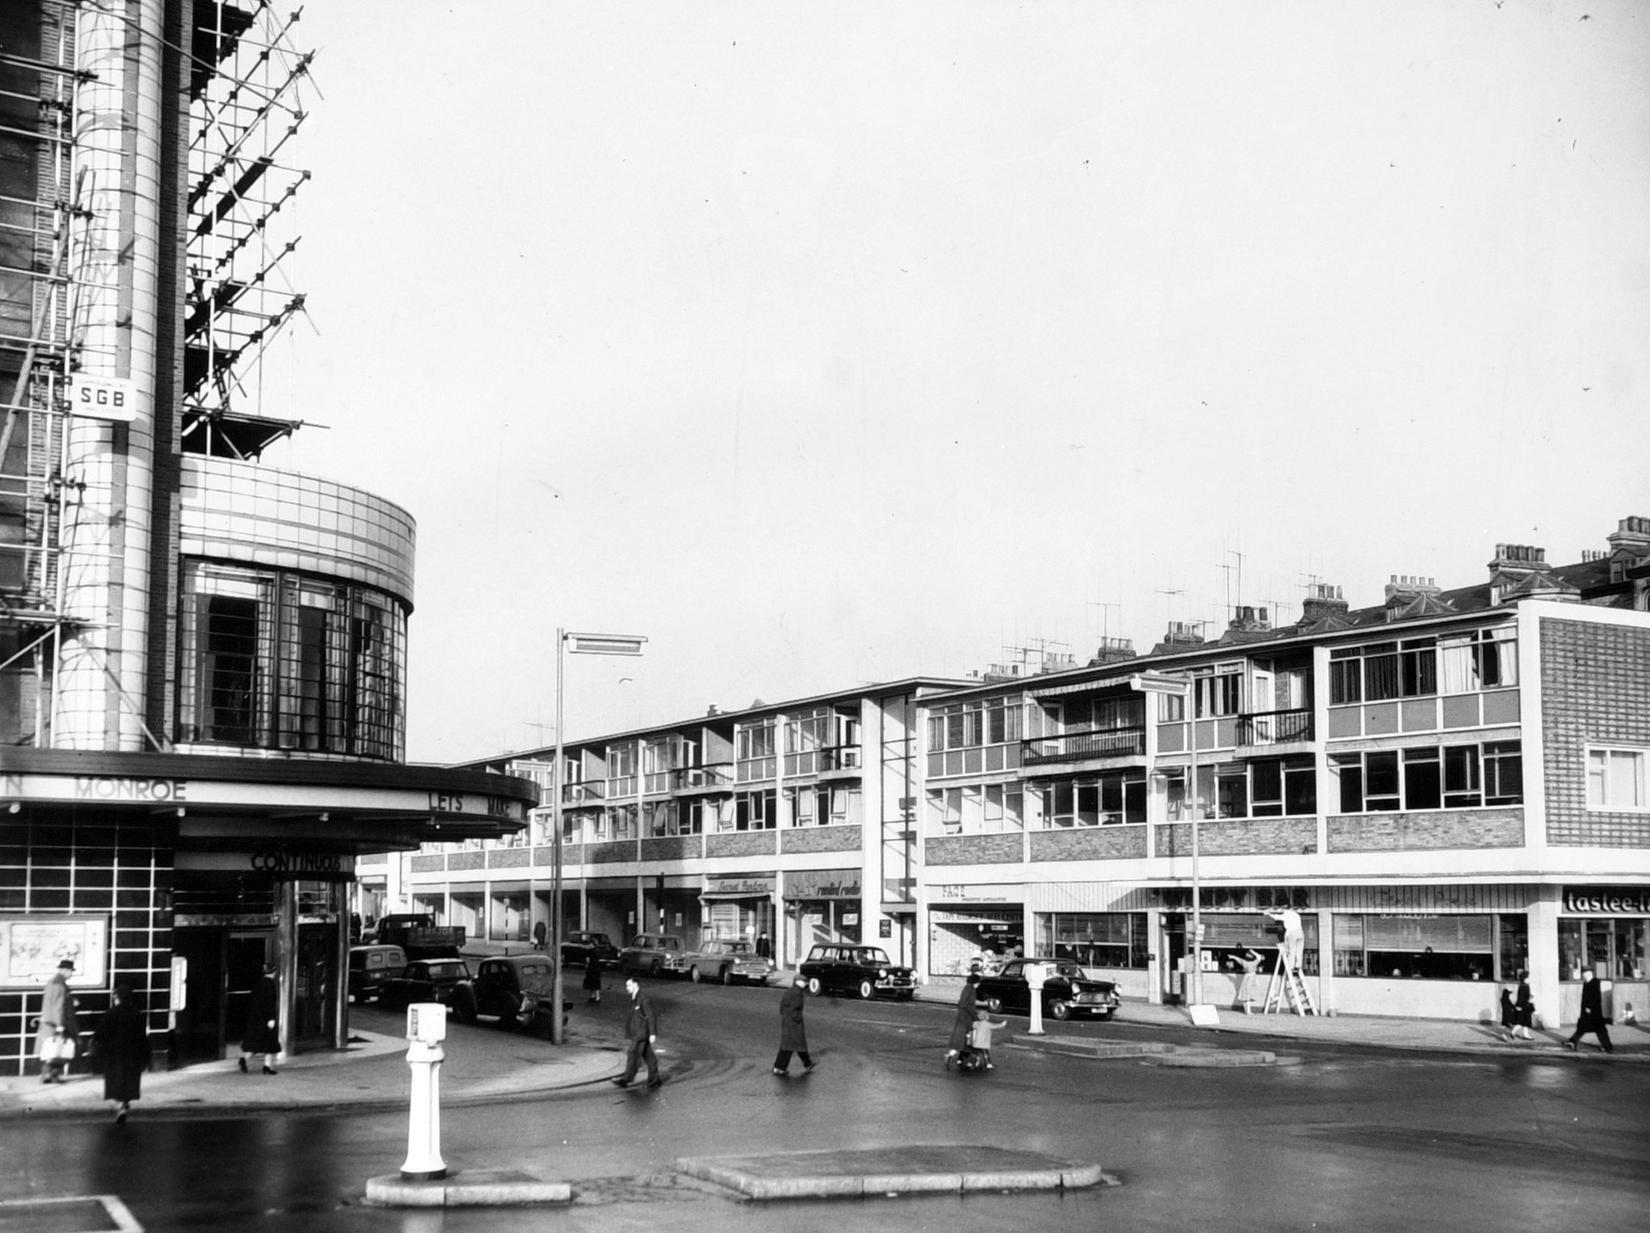 The Northway junction, the Odeon cinema on the left is now the Stephen Joseph Theatre.